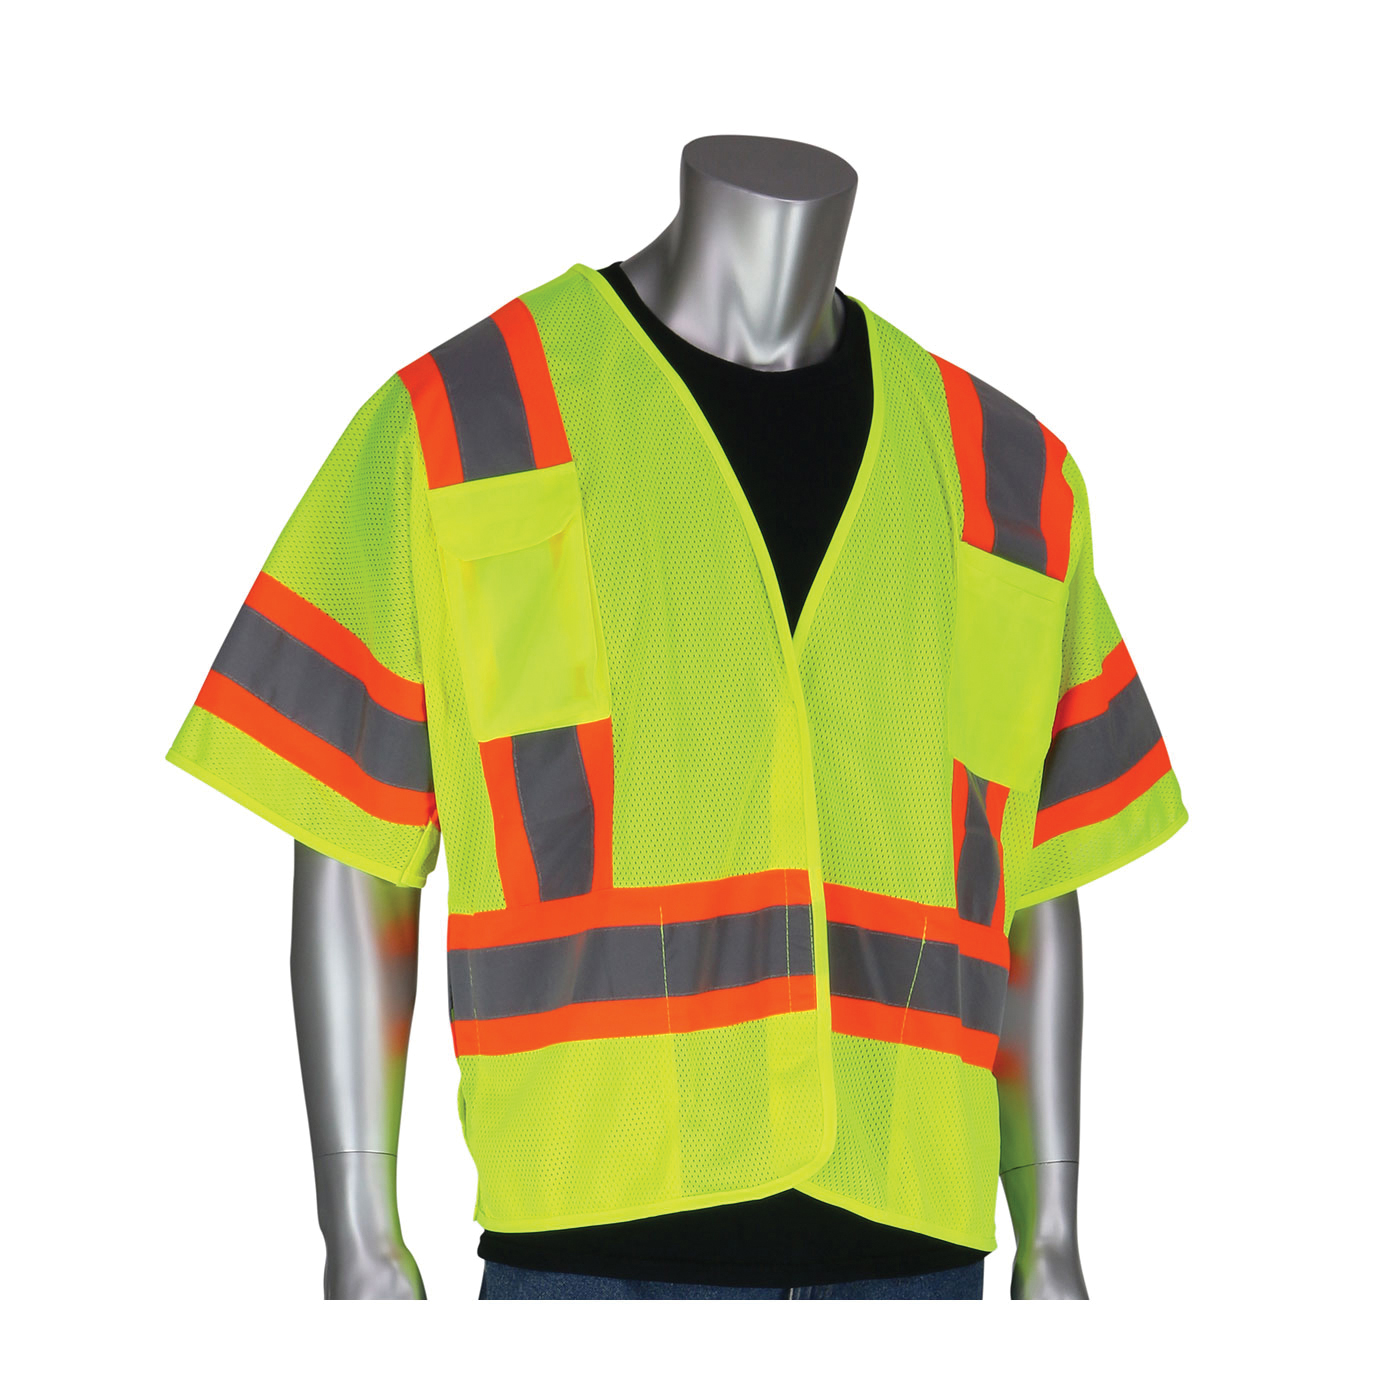 PIP® 303-5PMTT-LY/3X 2-Tone Safety Vest, 3XL, Hi-Viz Lime Yellow, Polyester Mesh, Hook and Loop Closure, 4 Pockets, ANSI Class: Class 3, Specifications Met: ANSI 107 Type R